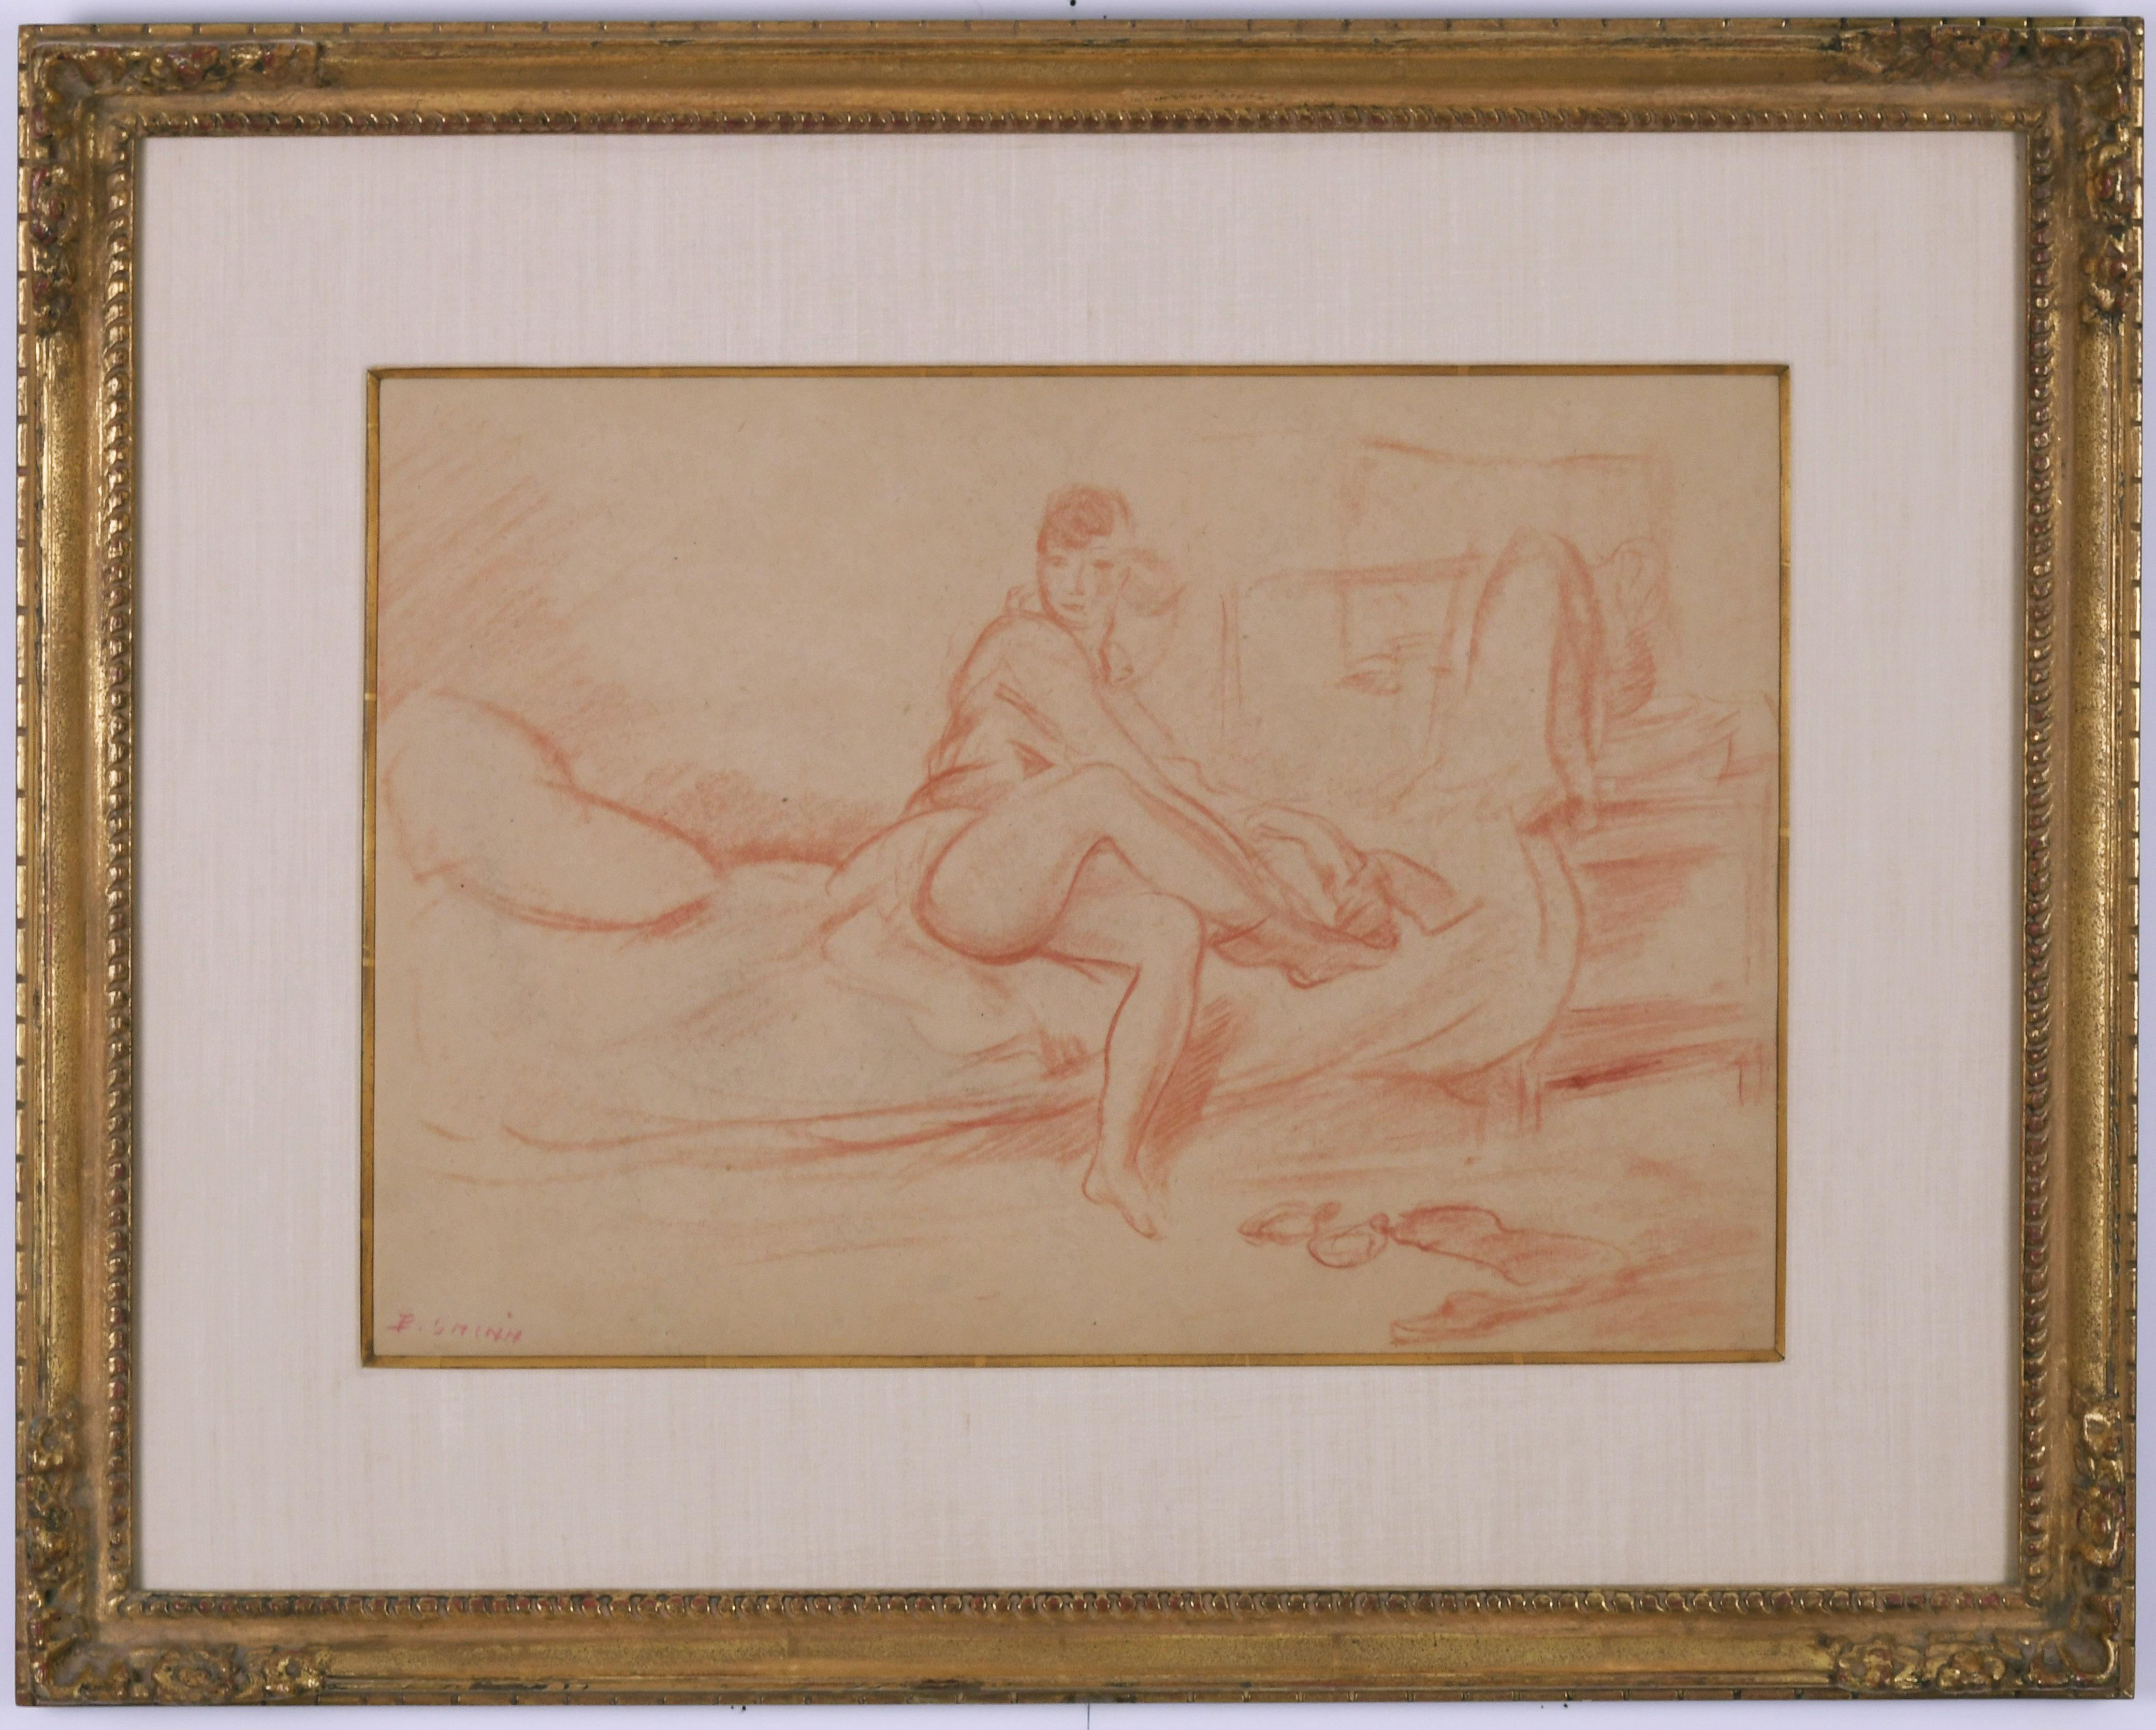 Untitled (Woman Removing Her Stockings)
Conte crayon on paper. c. 1905
Signed lower right: E Shinn
Provenance:
James Graham & Sons, New York (labels)
Ronald C. Sloter, Columbus
Columbus College of Art and Design
De-accessed

Exhibited: Everett